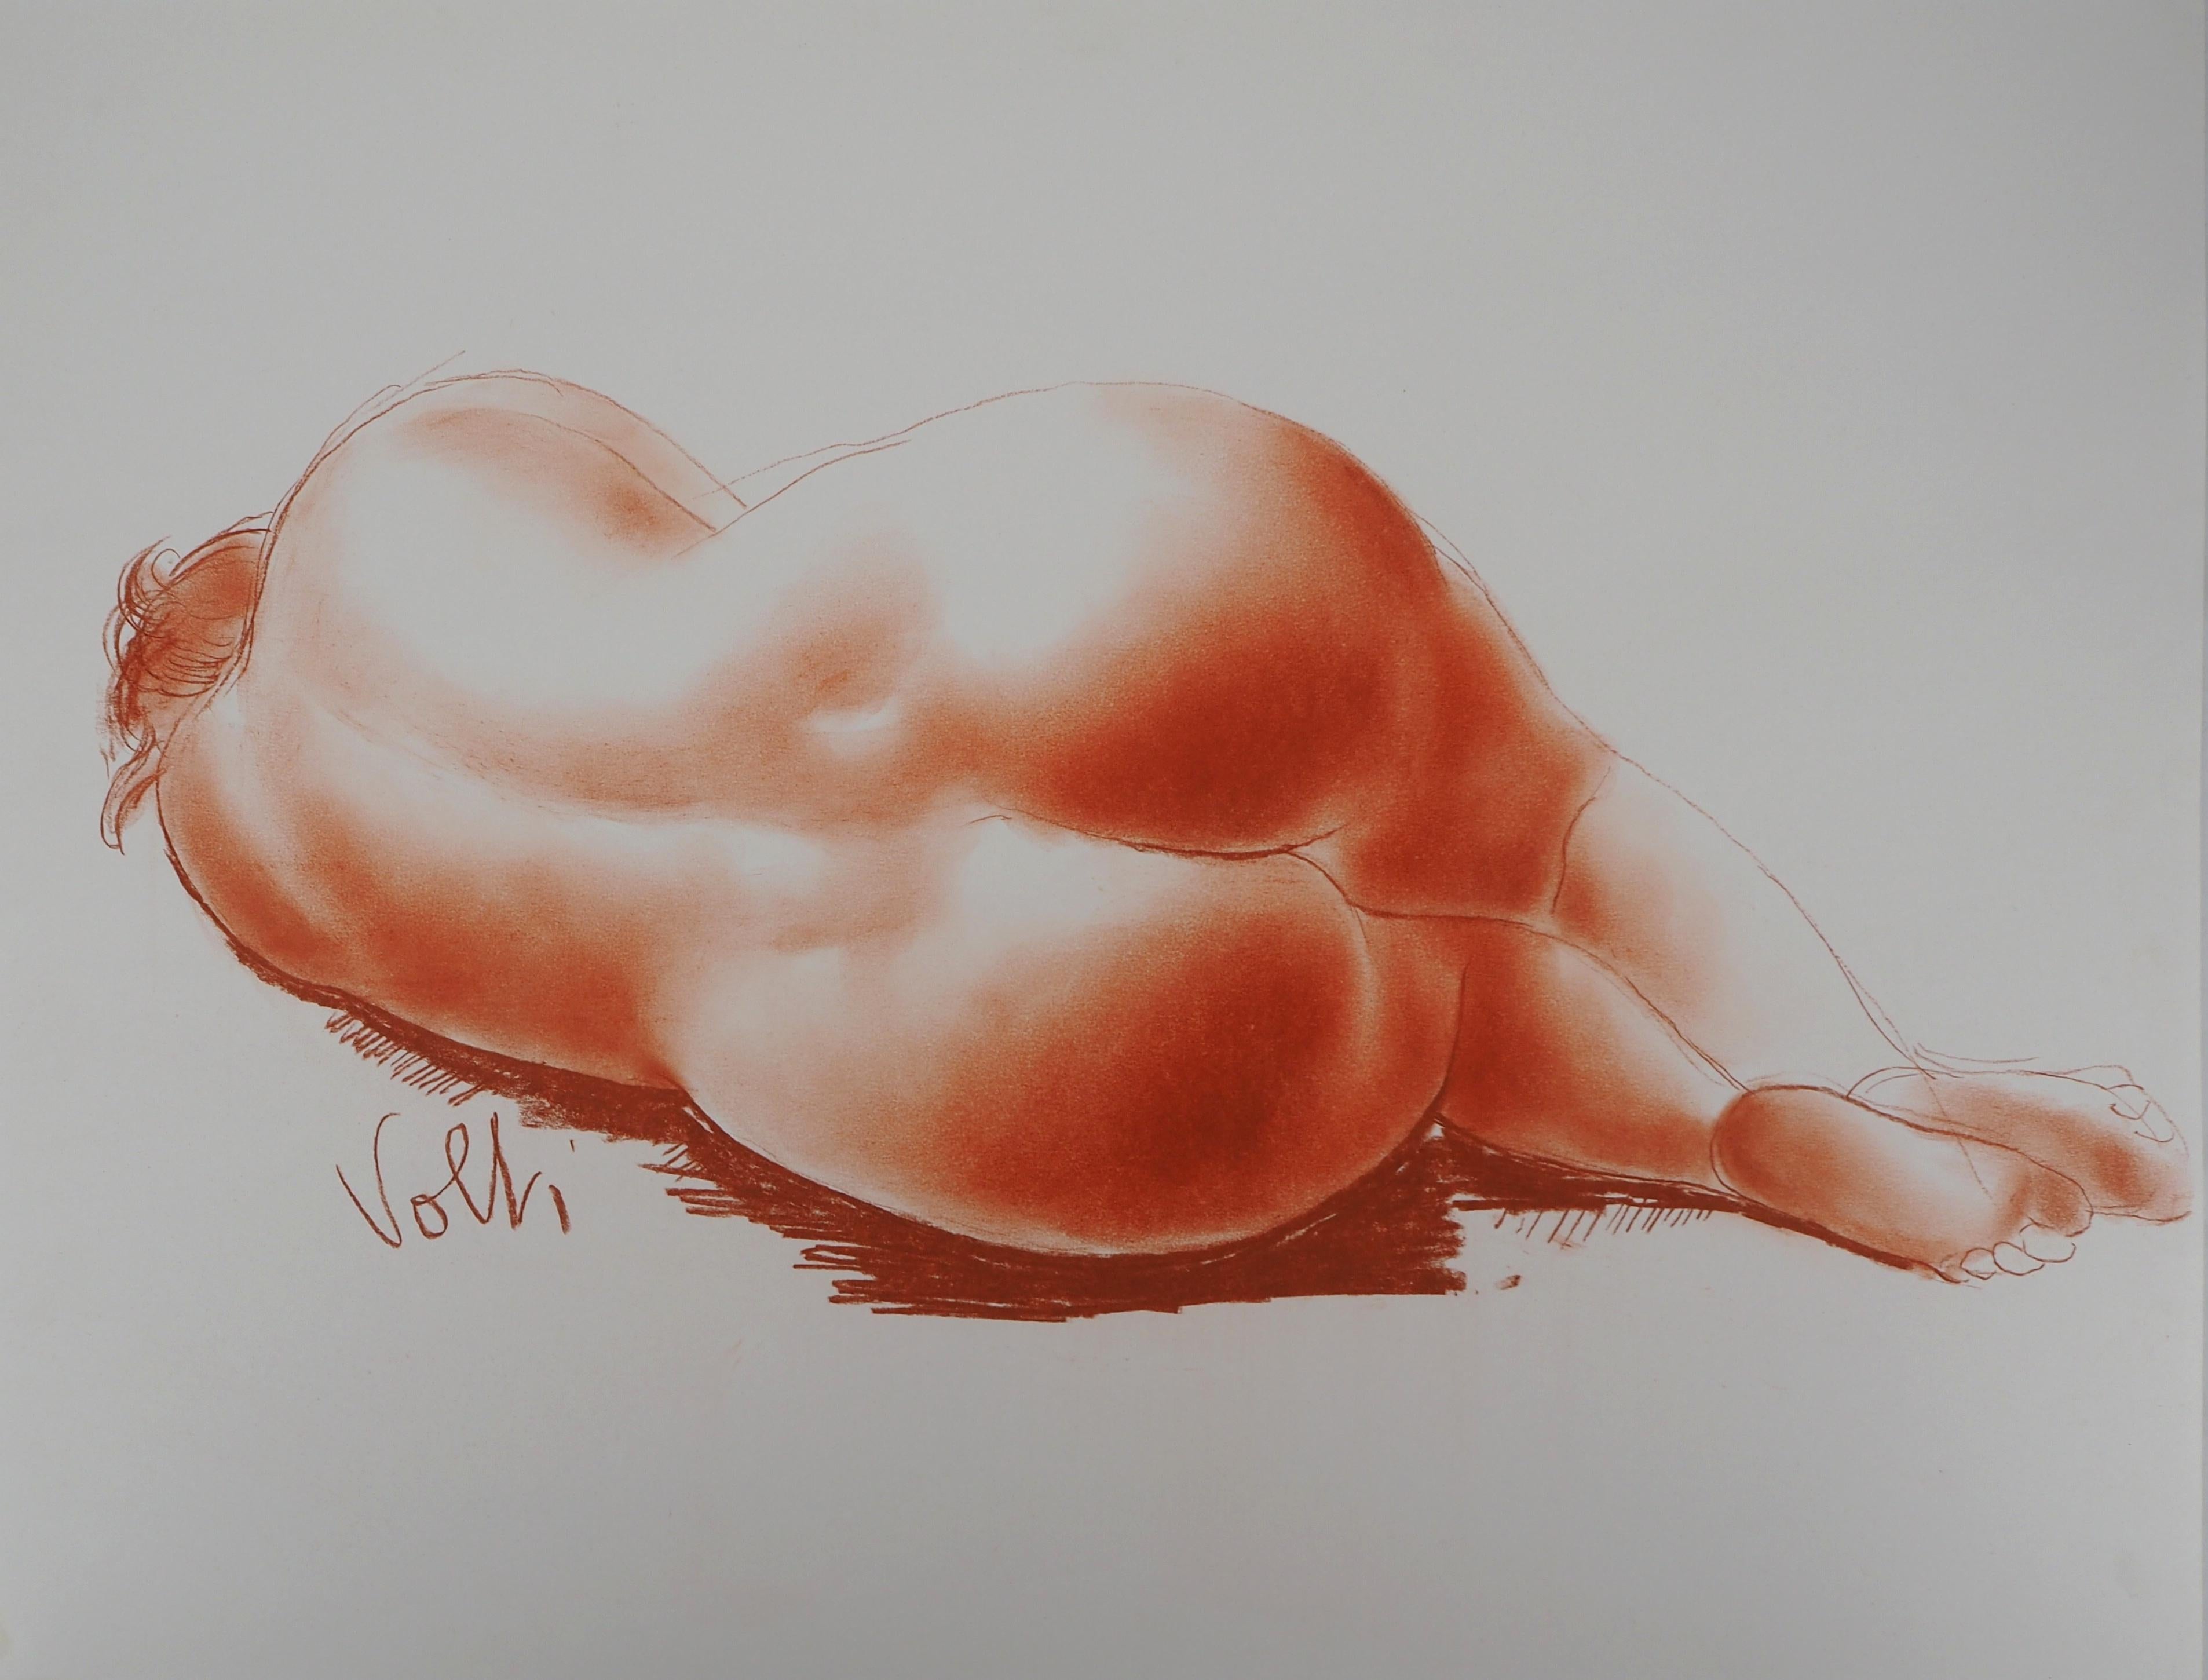 Reclining Nude - Original handsigned drawing in sanguine - Art by Antoniucci Volti